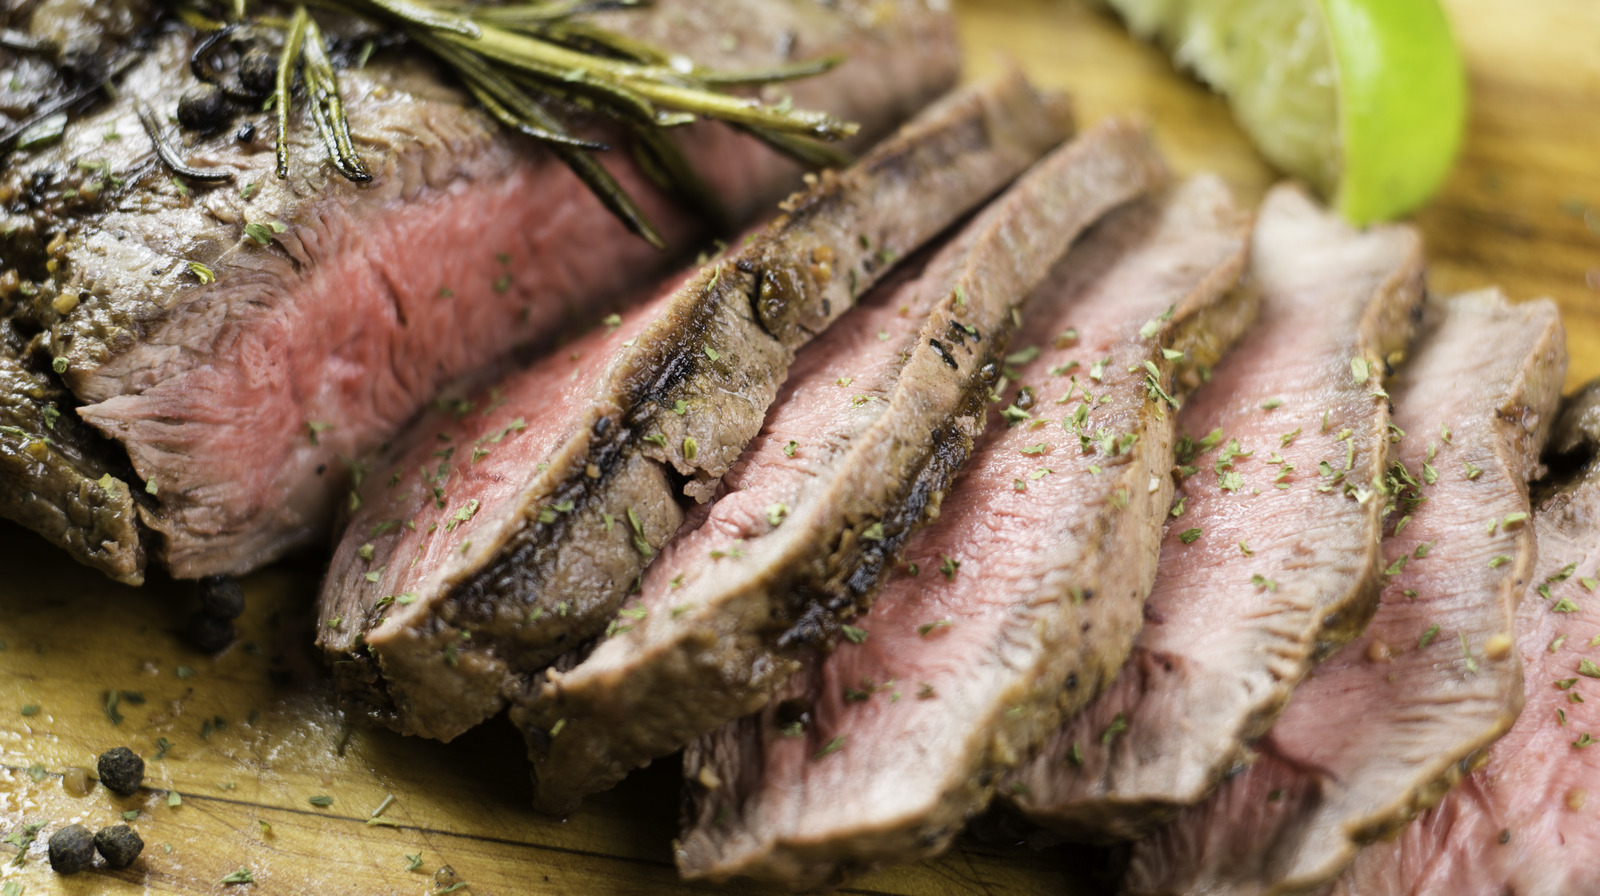 https://www.tastingtable.com/img/gallery/why-london-broil-is-a-great-match-for-rare-steak-lovers/l-intro-1683131777.jpg